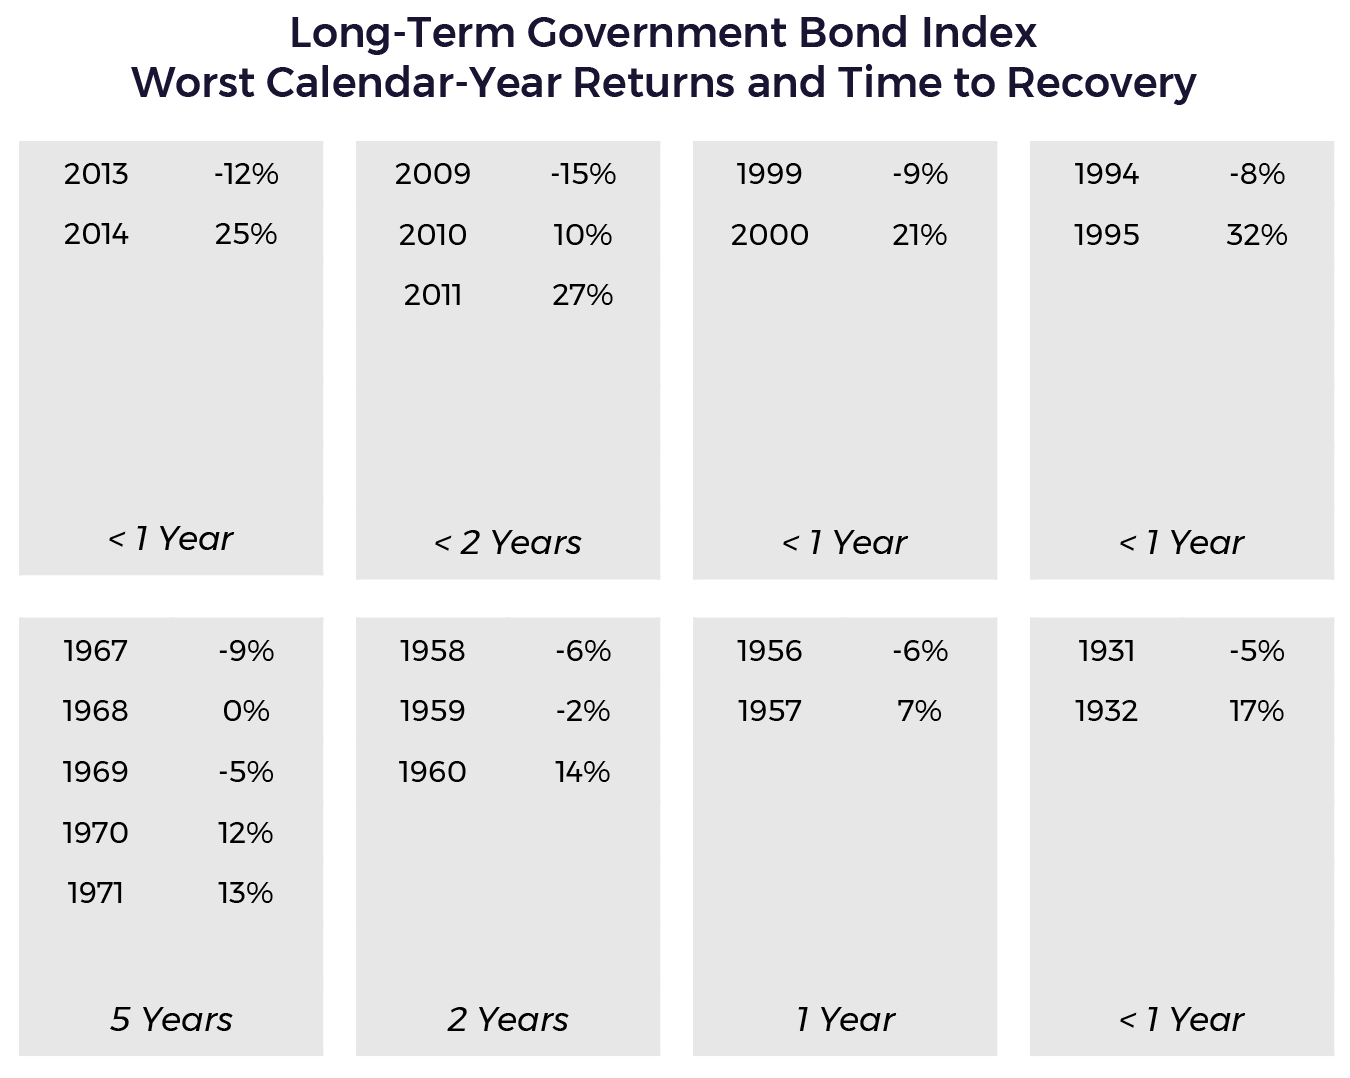 Long-Term Government Bonds Index Time Recovery Table